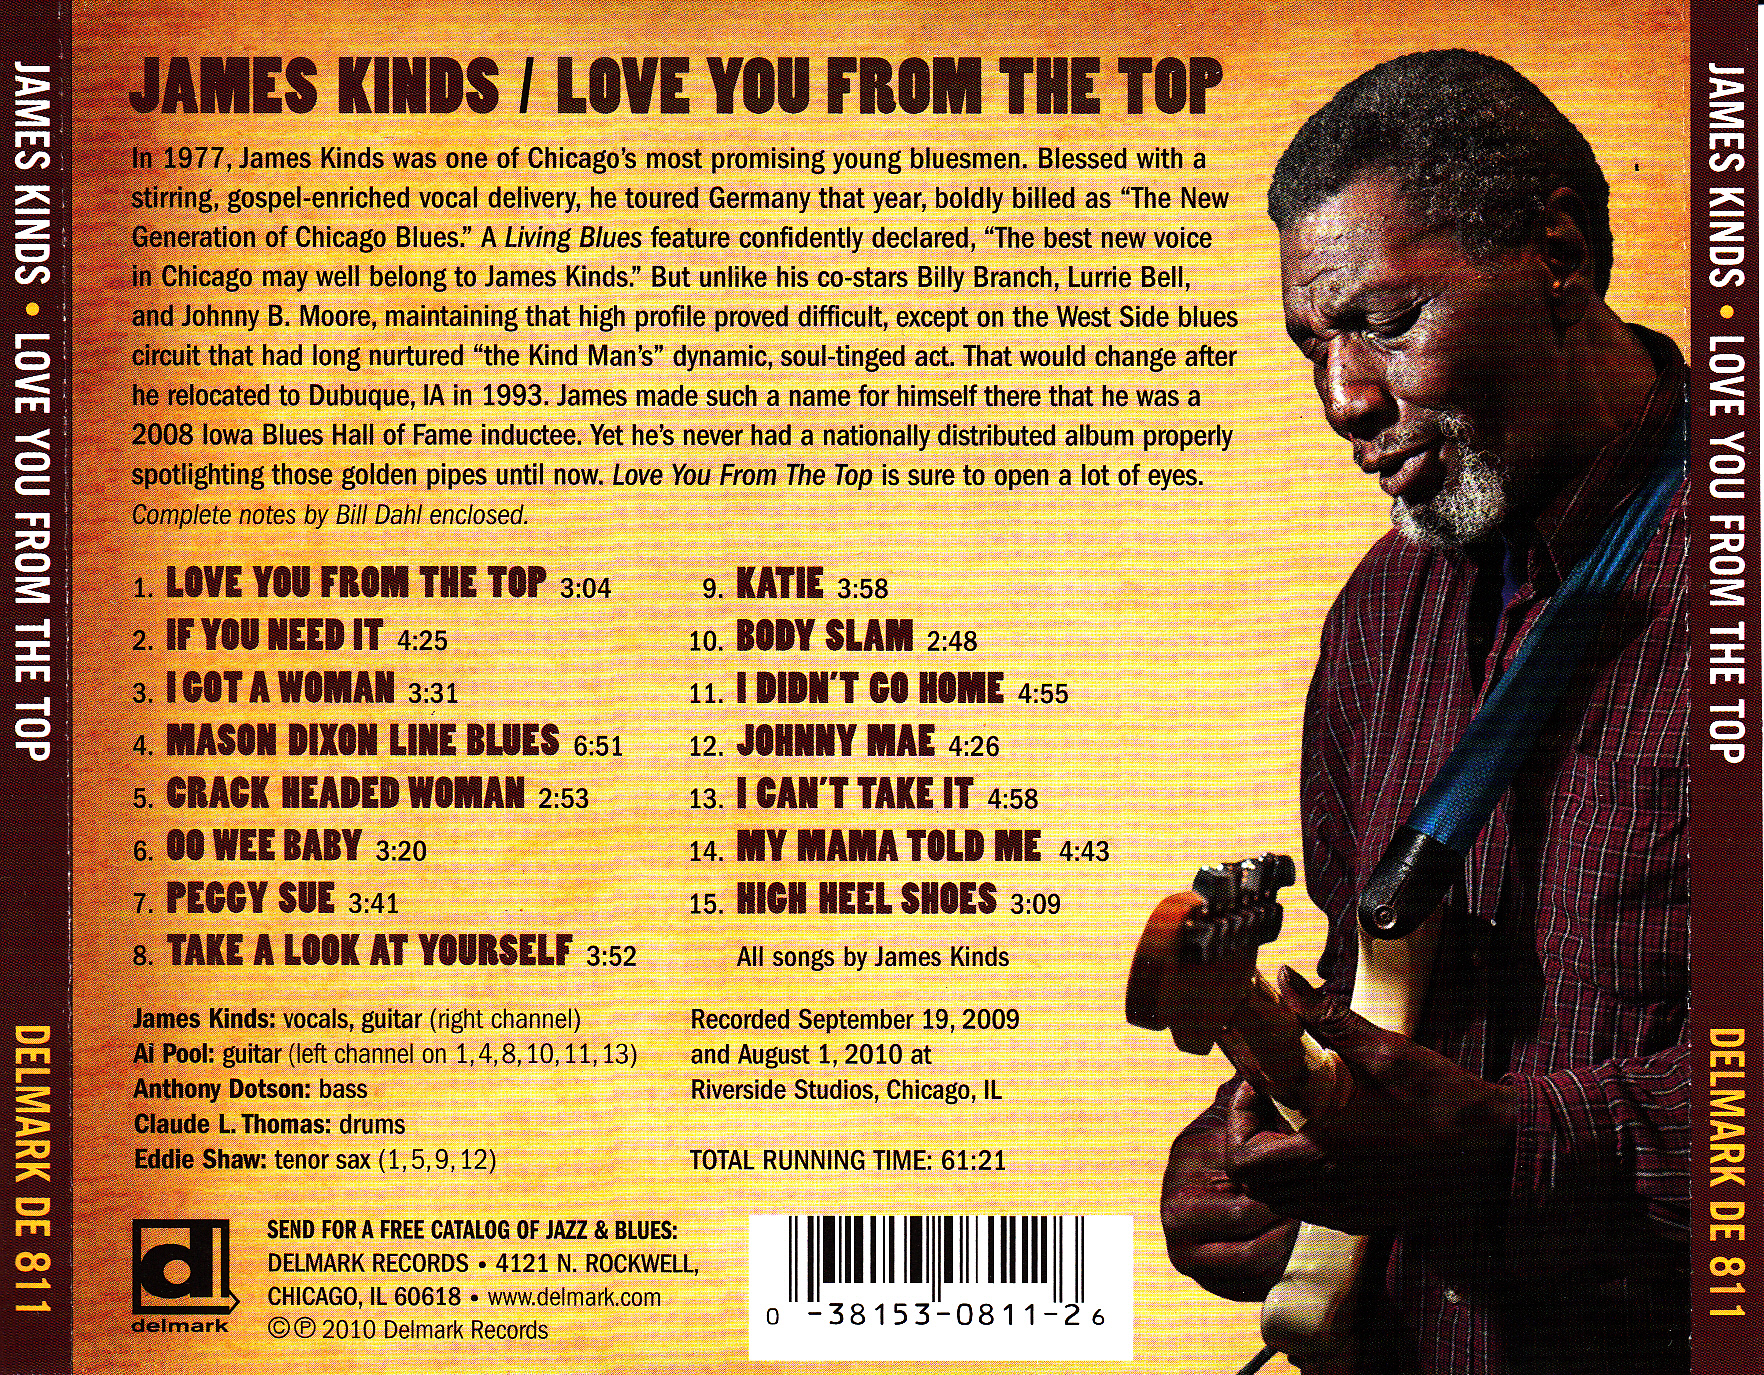 James Kinds - Love You From The Top - Tray